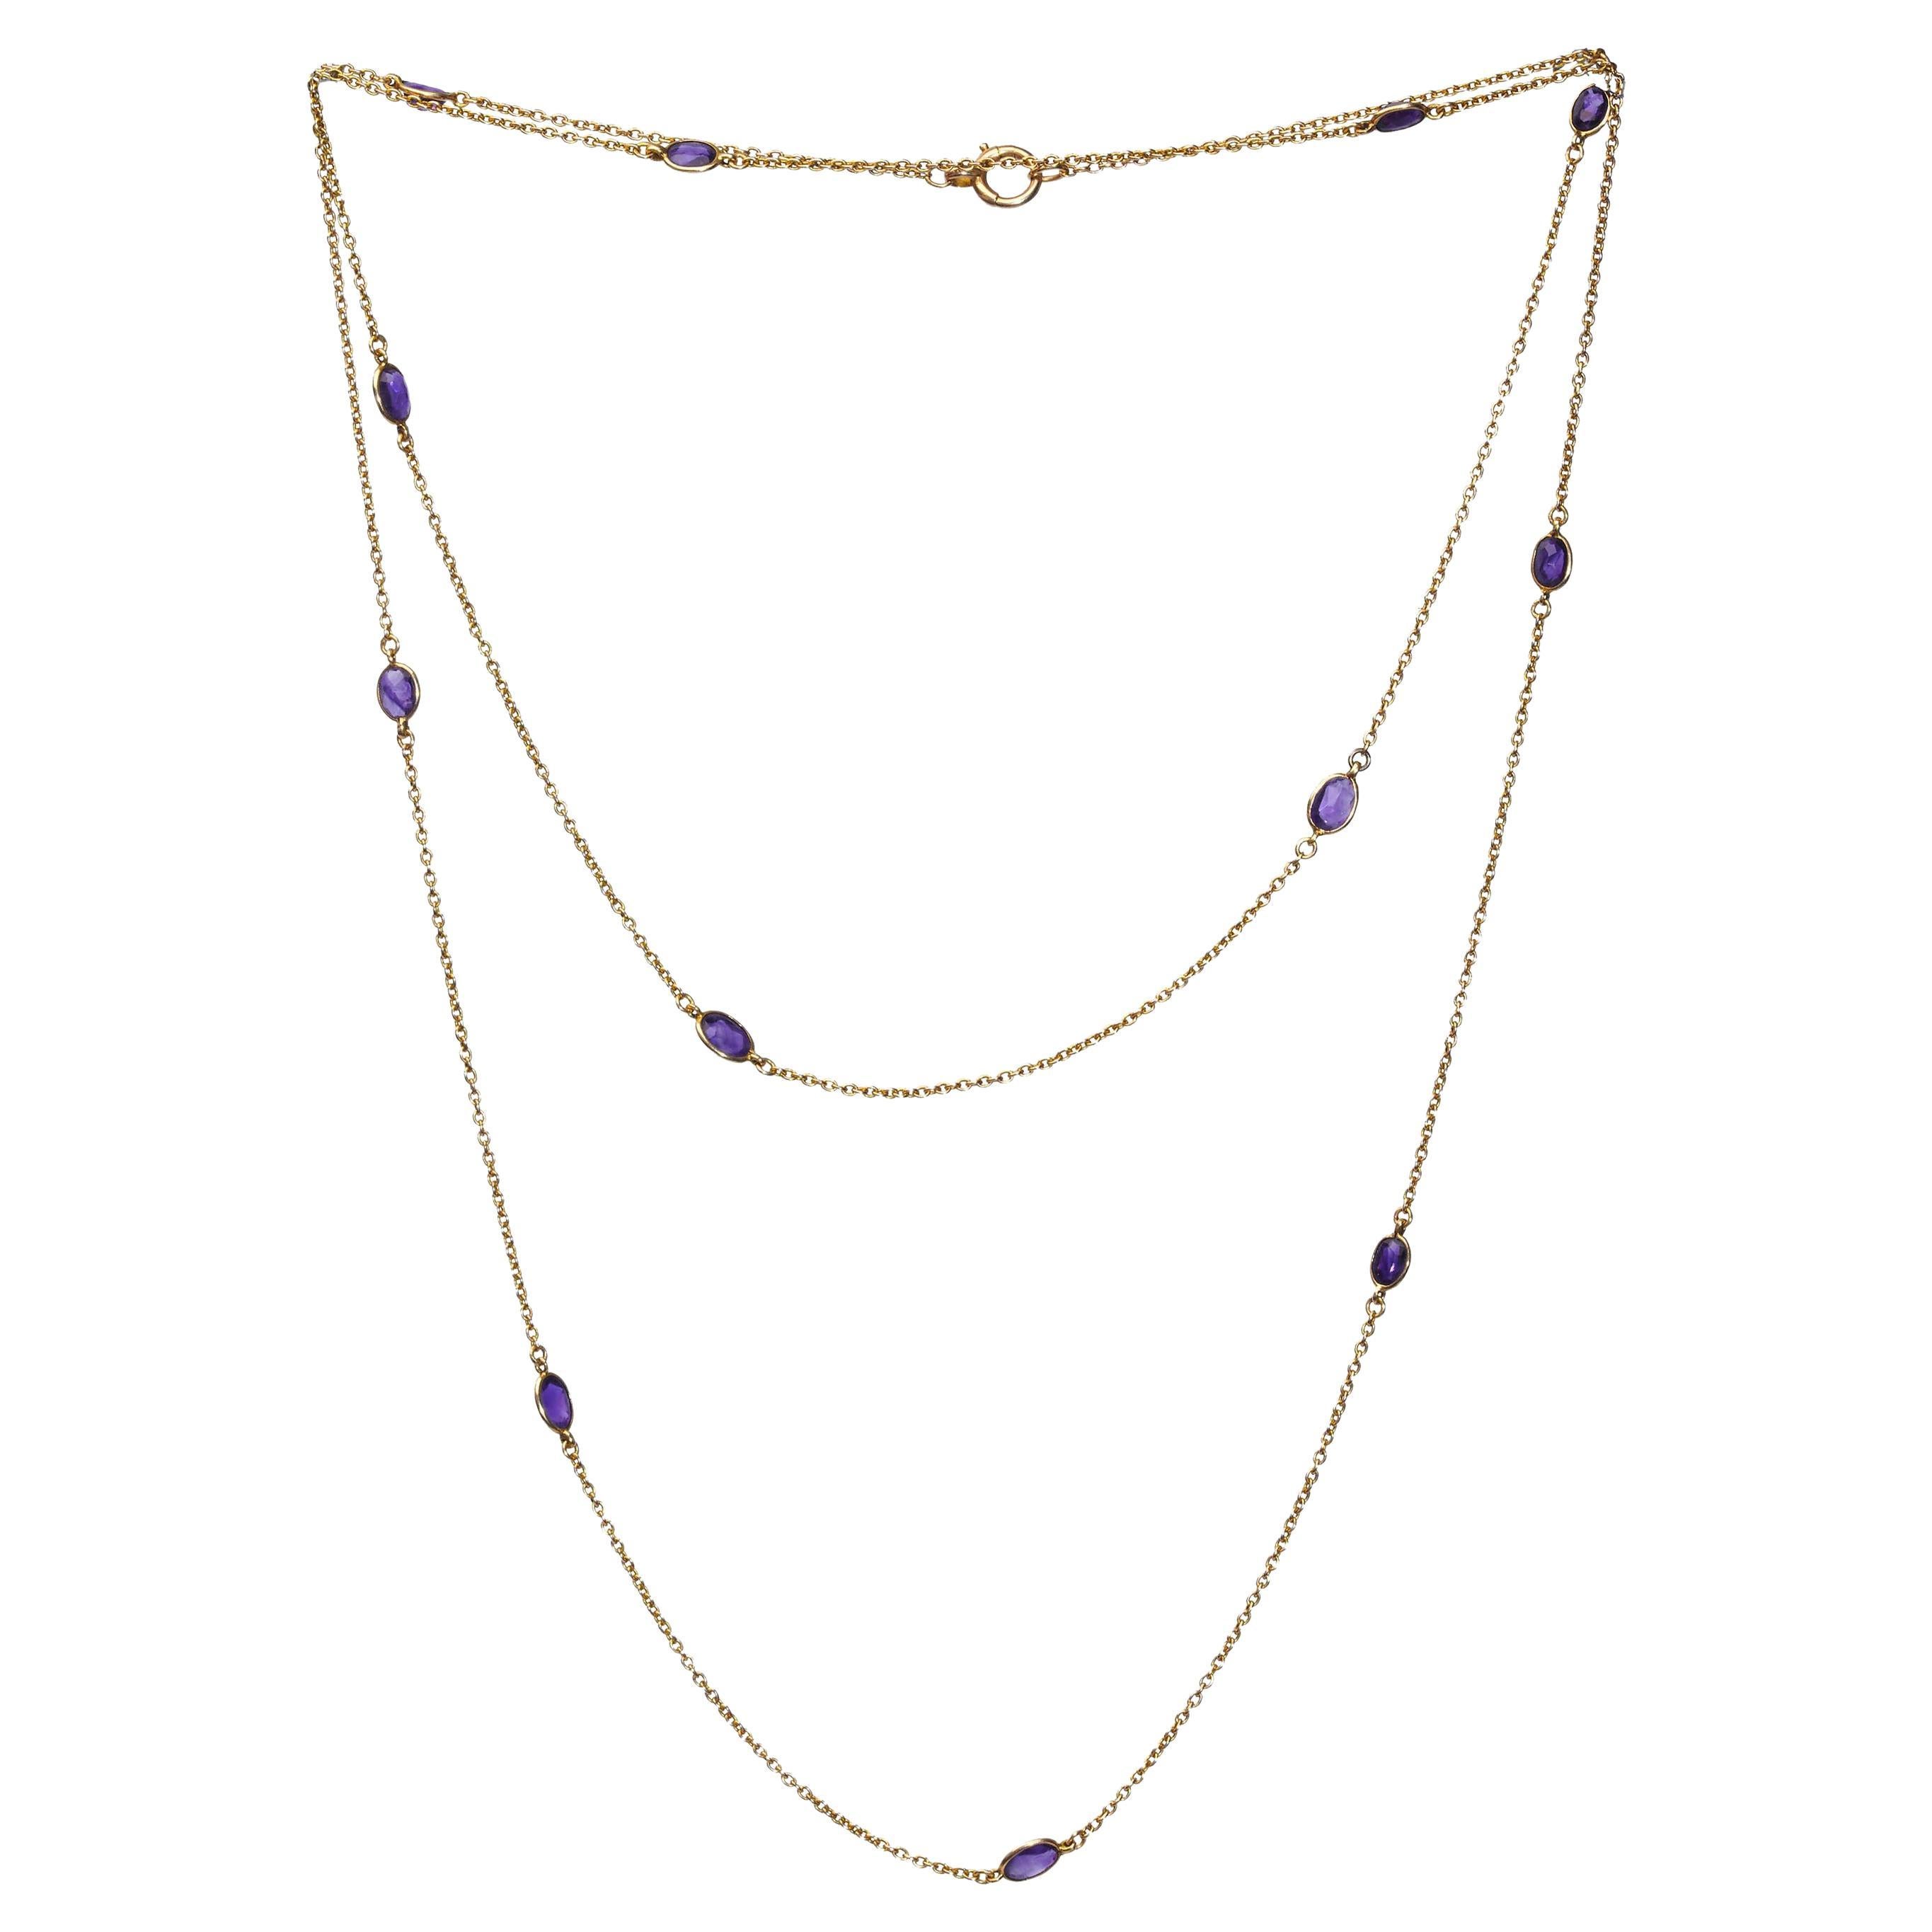 Antique Amethyst and Gold Long Chain Necklace, Circa 1920 For Sale